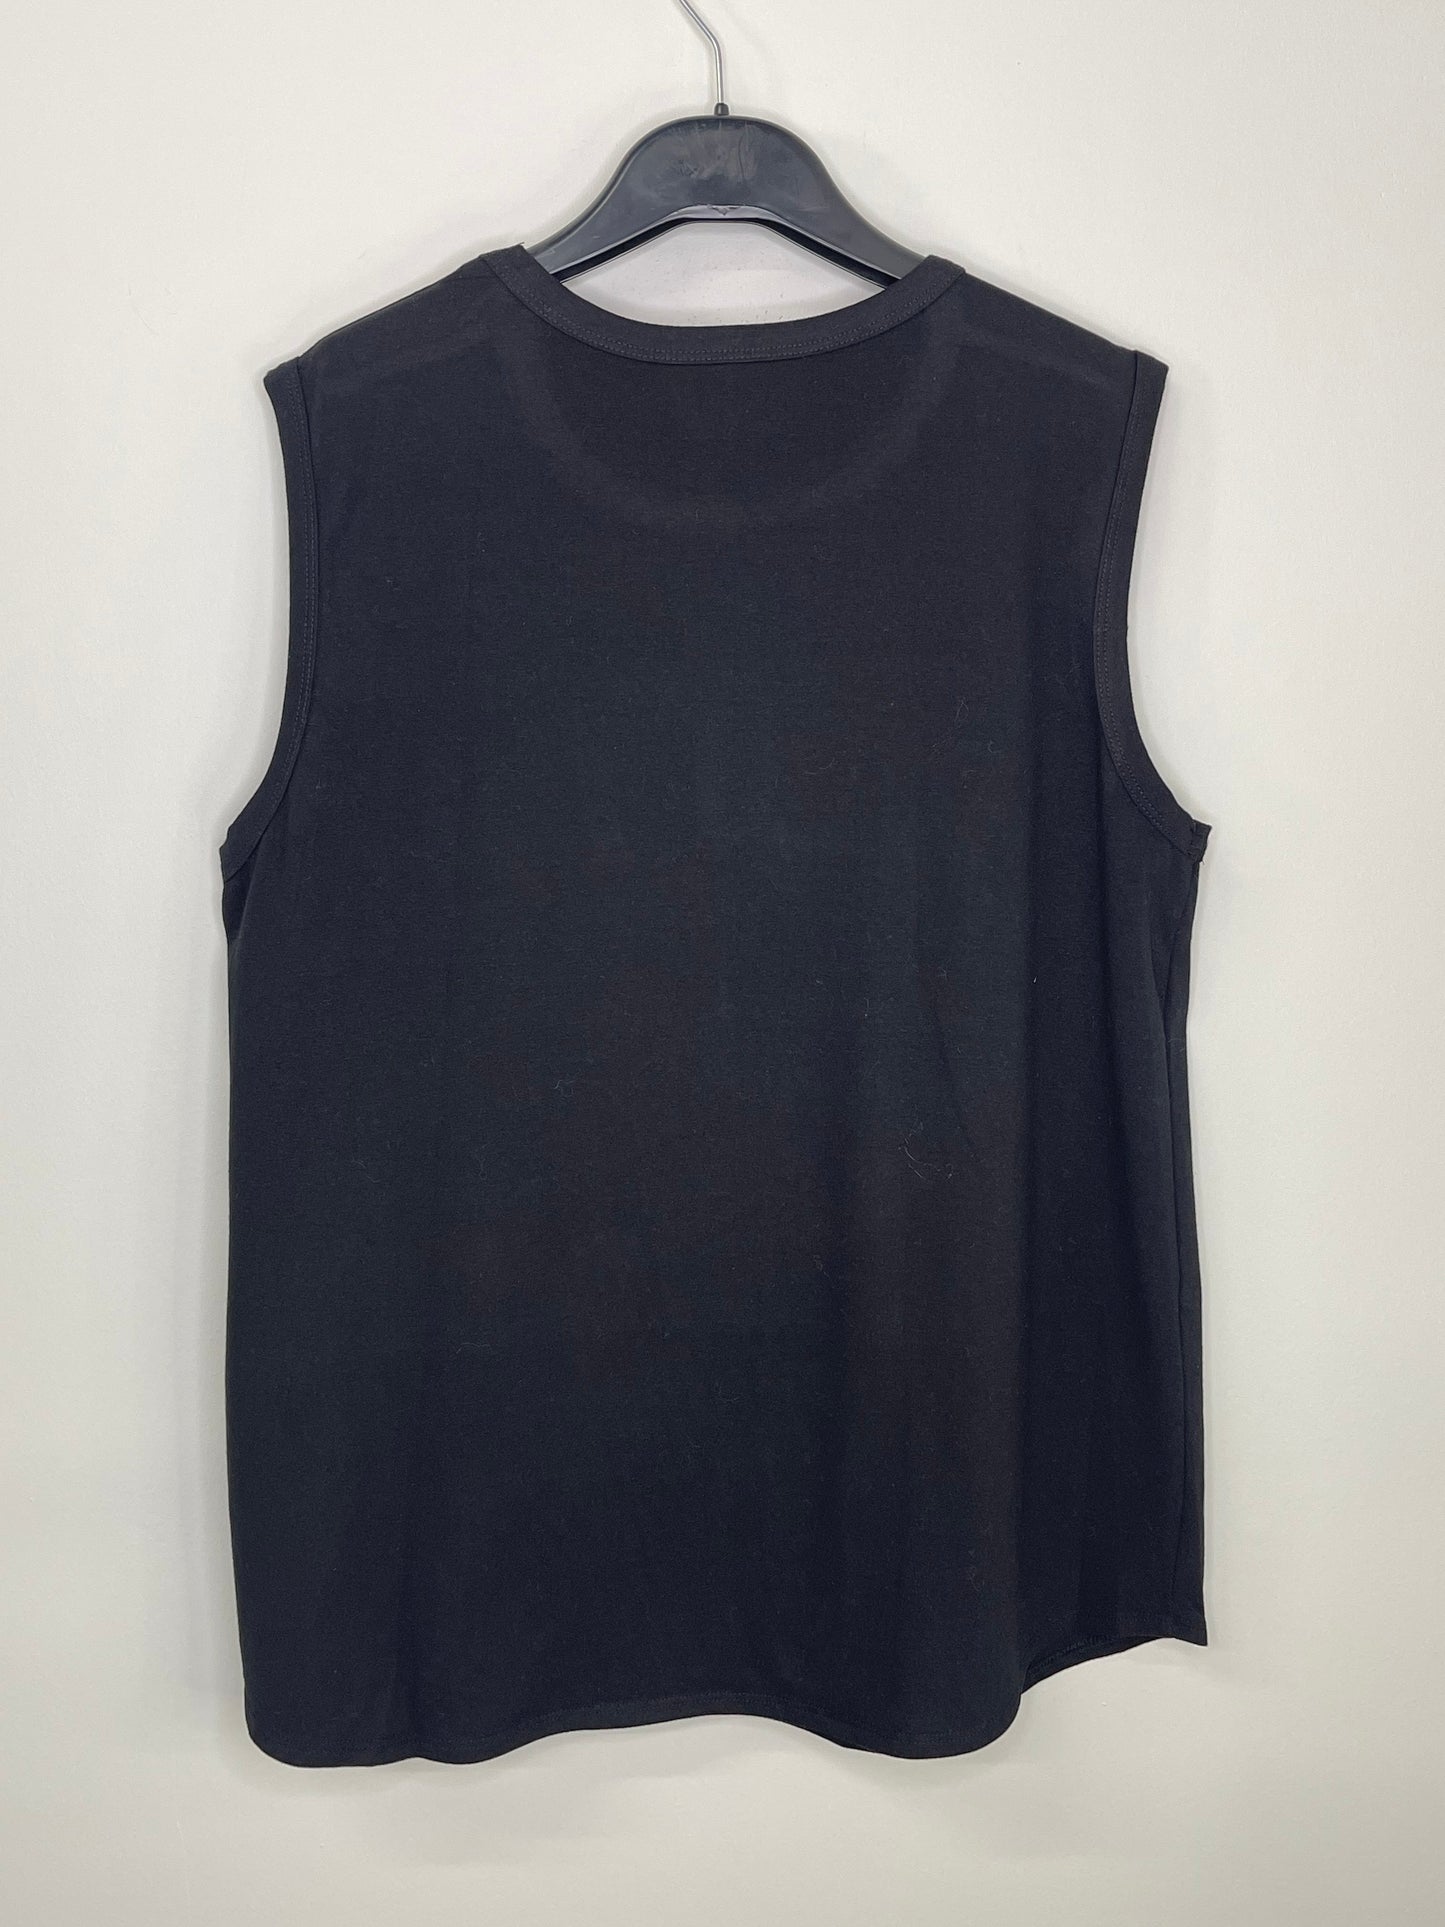 Game Day Tank, Distressed Muscle Black, Blitz Fire Football